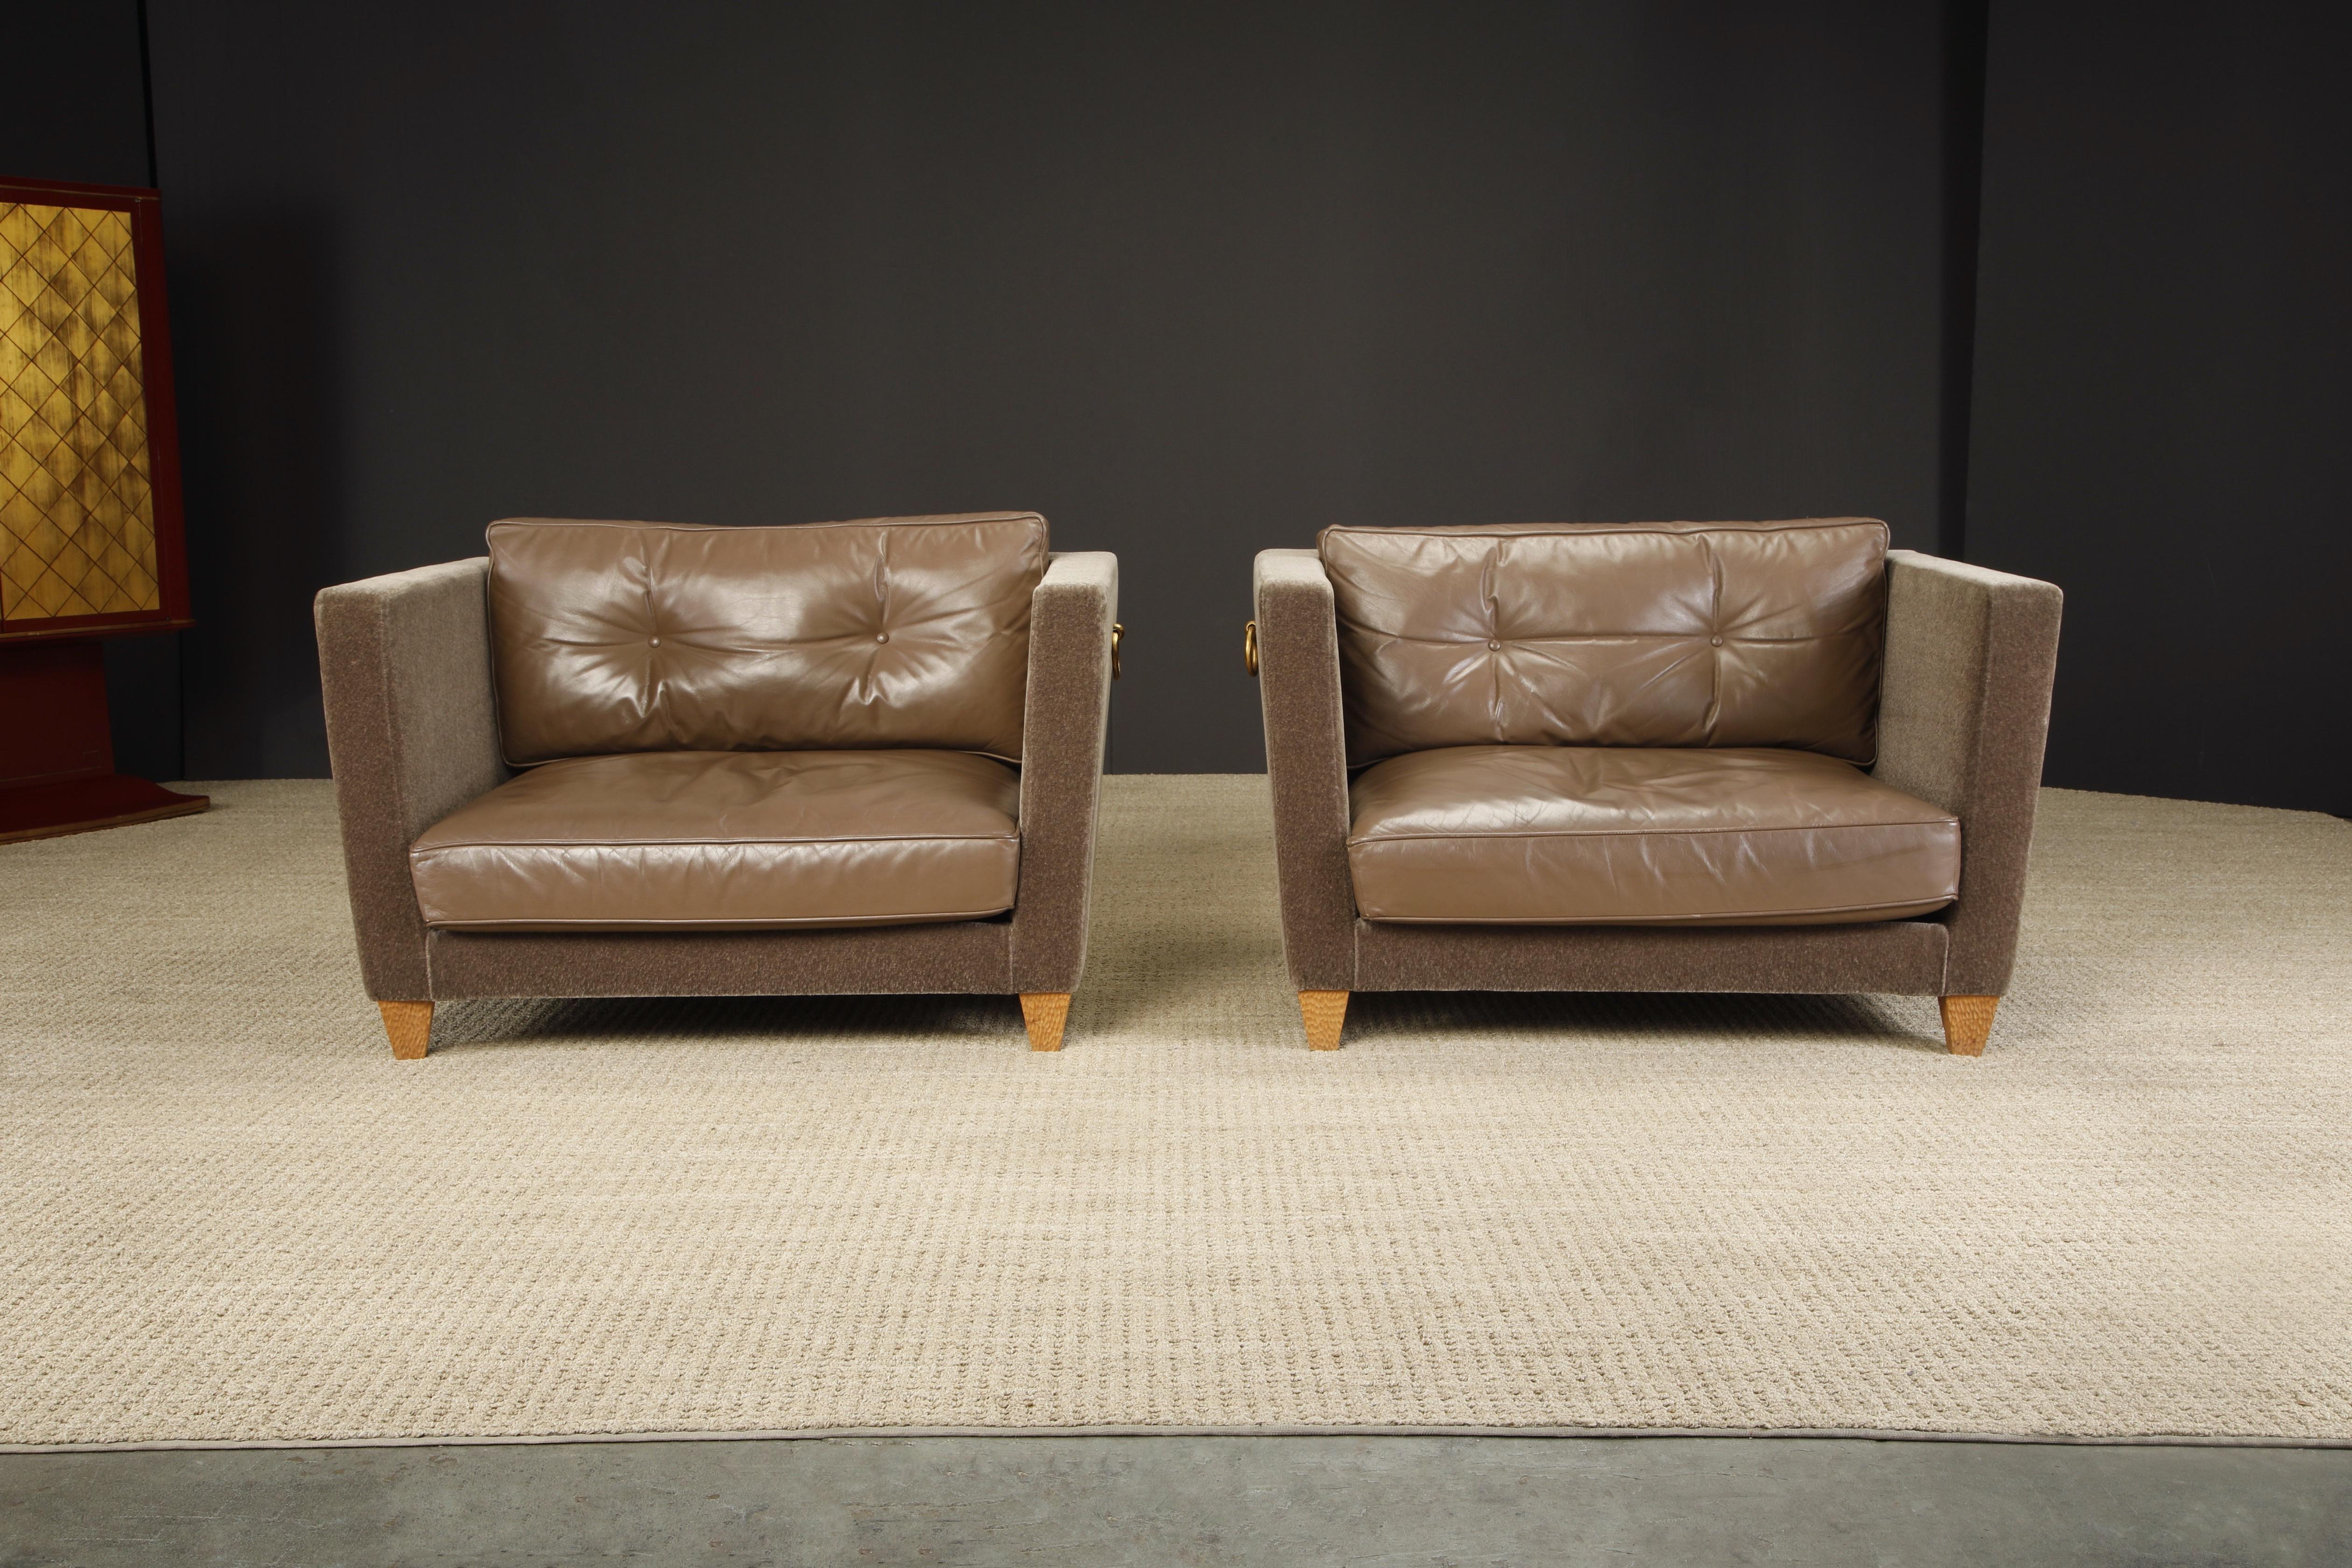 The pinnacle of luxury in size and materials, this pair of oversized 'Titan' club chairs by famed French designer Olivier Gagnère featuring luxurious mohair, supple very-high-quality-leather, chip-carved oak legs, and gilt bronze accent handles.